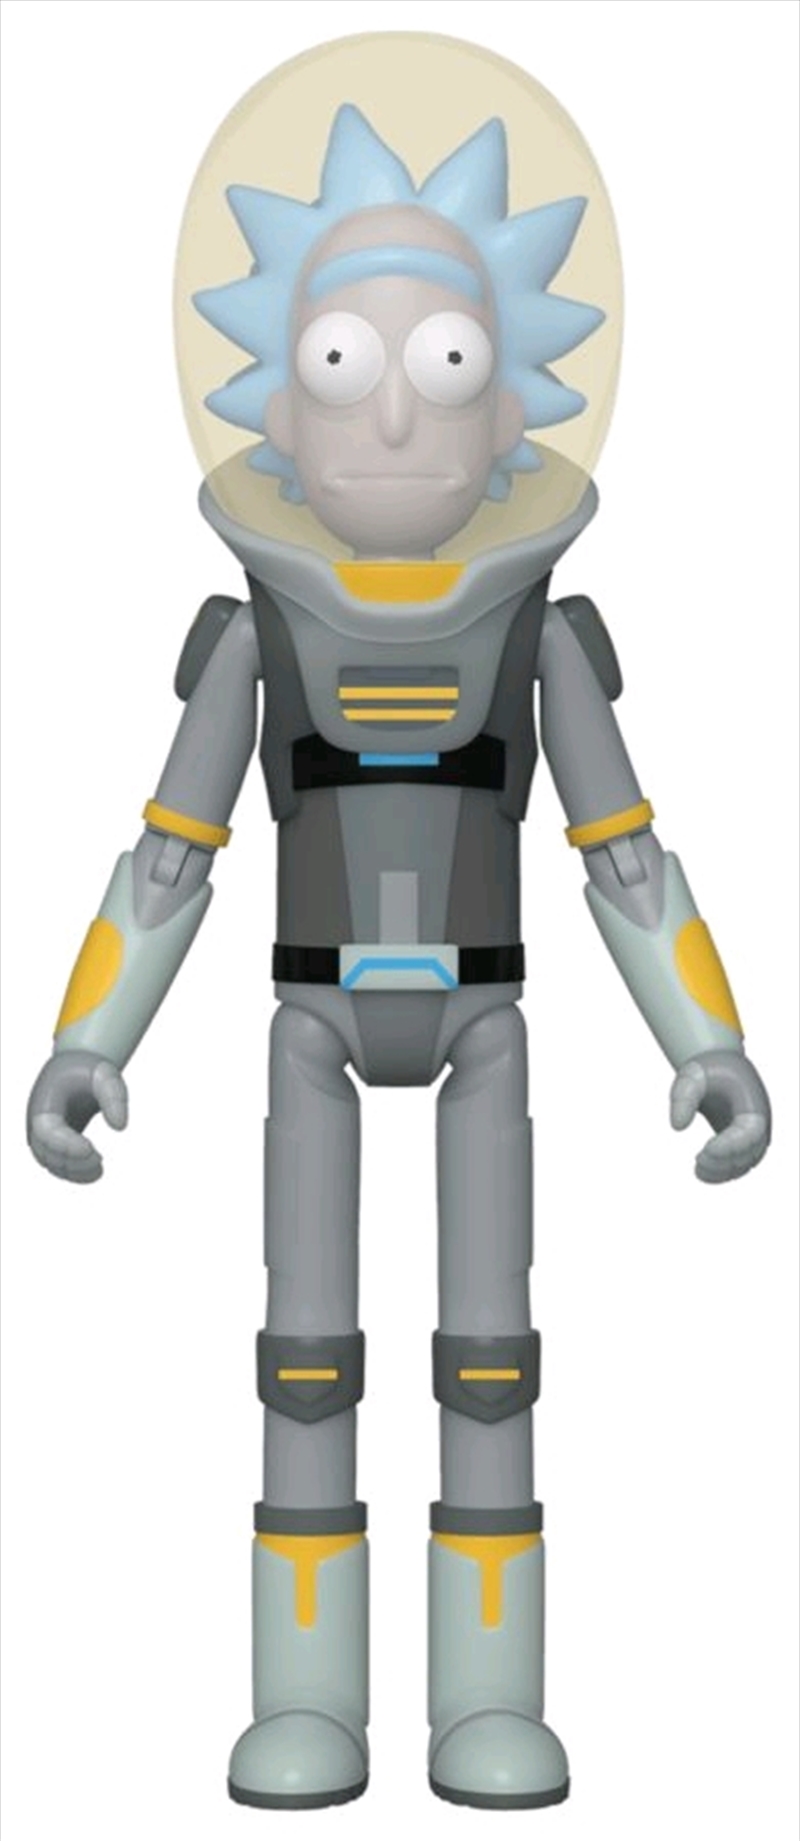 Rick and Morty - Rick Space Suit Action Figure/Product Detail/Figurines